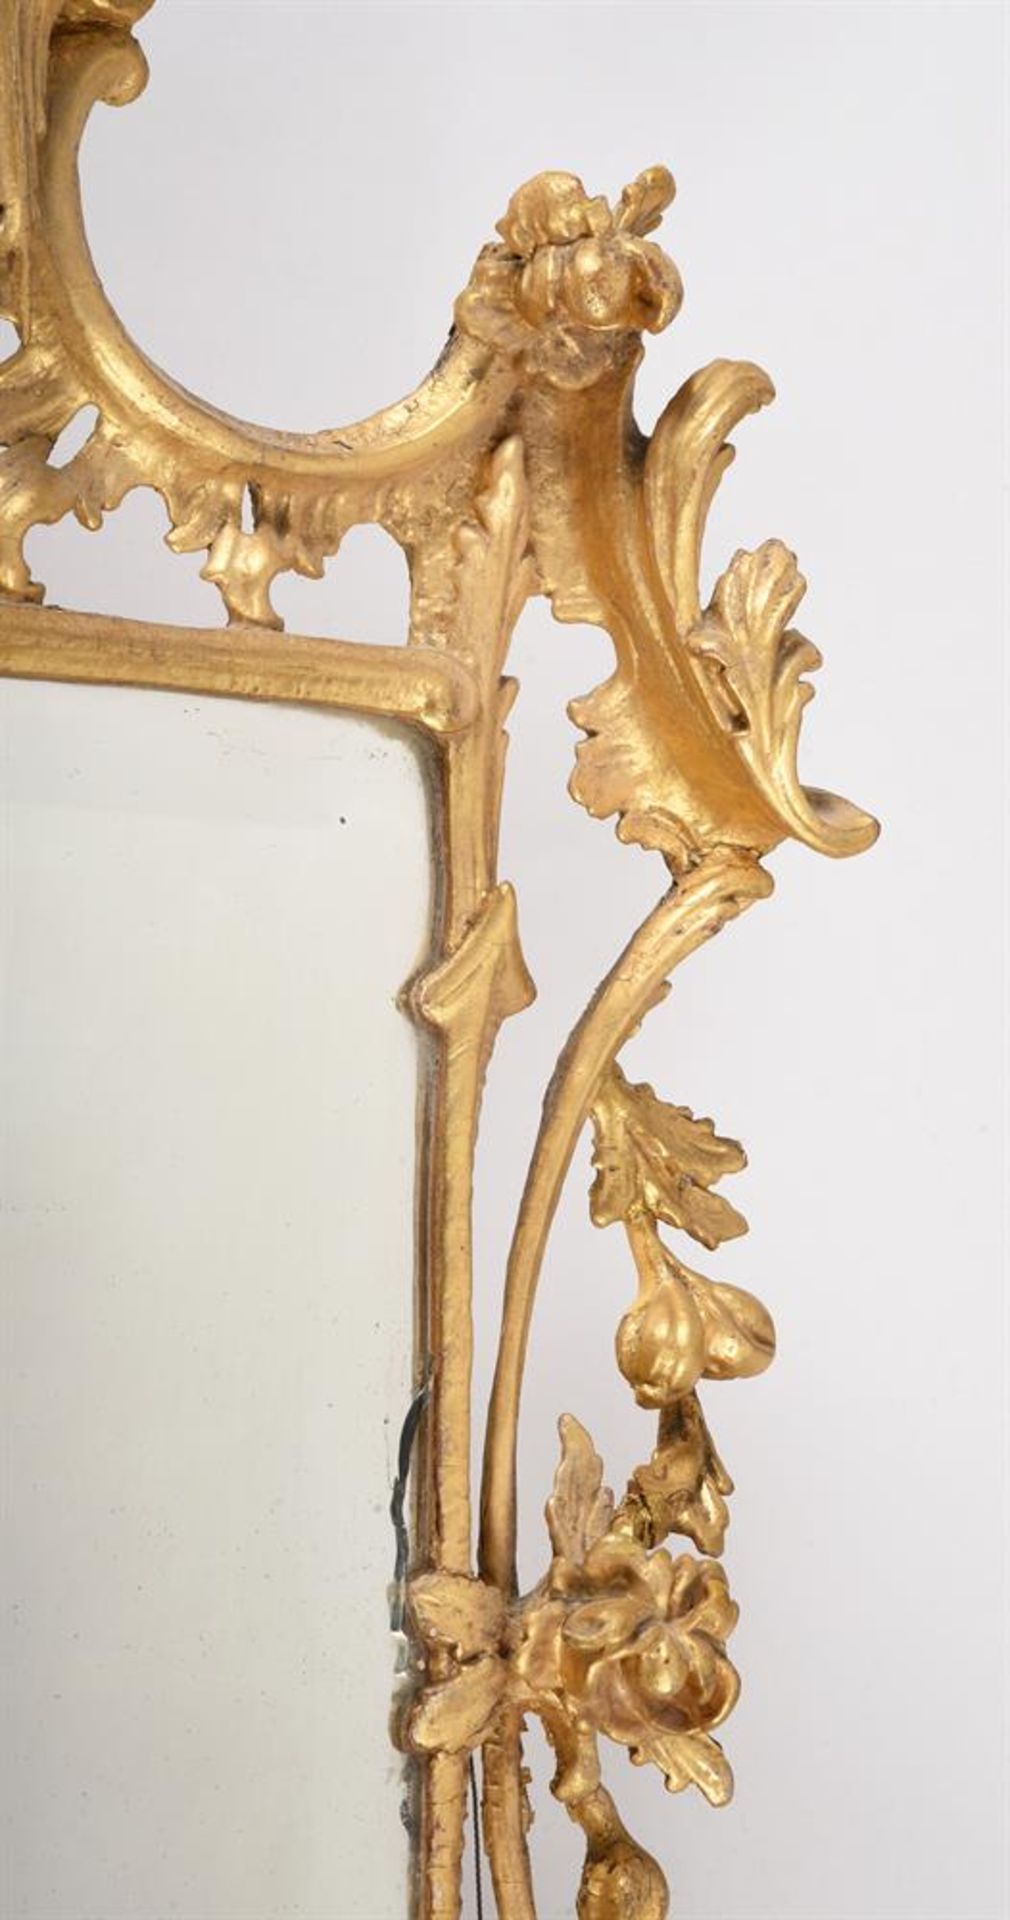 A GEORGE III CARVED GILTWOOD WALL MIRROR, SECOND HALF 18TH CENTURY - Image 3 of 6